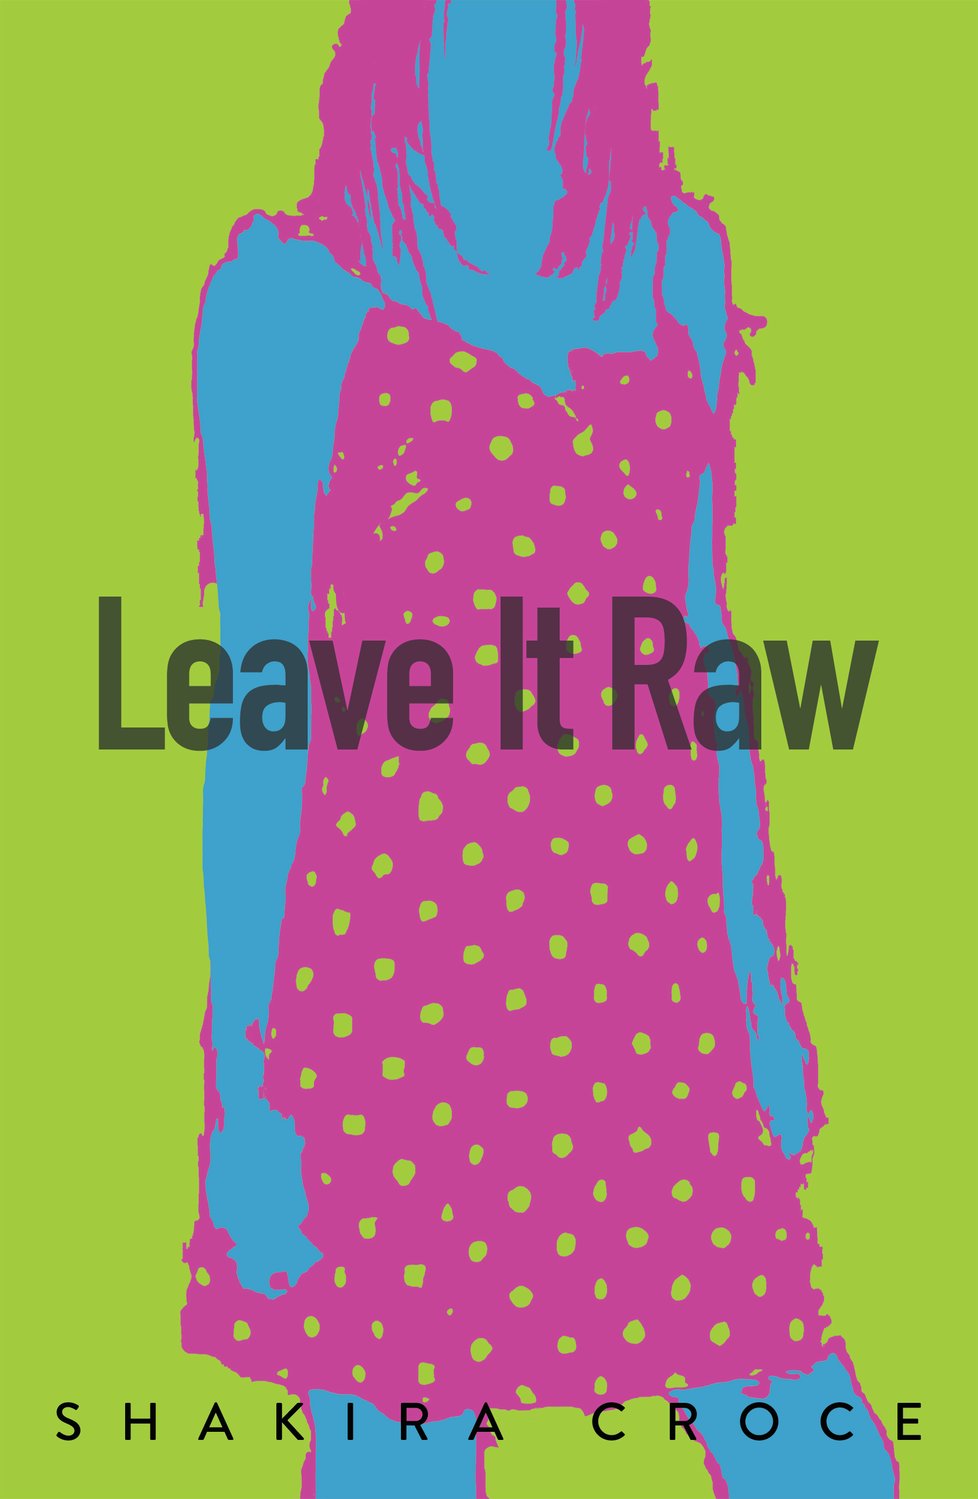 The cover art of “Leave It Raw.”